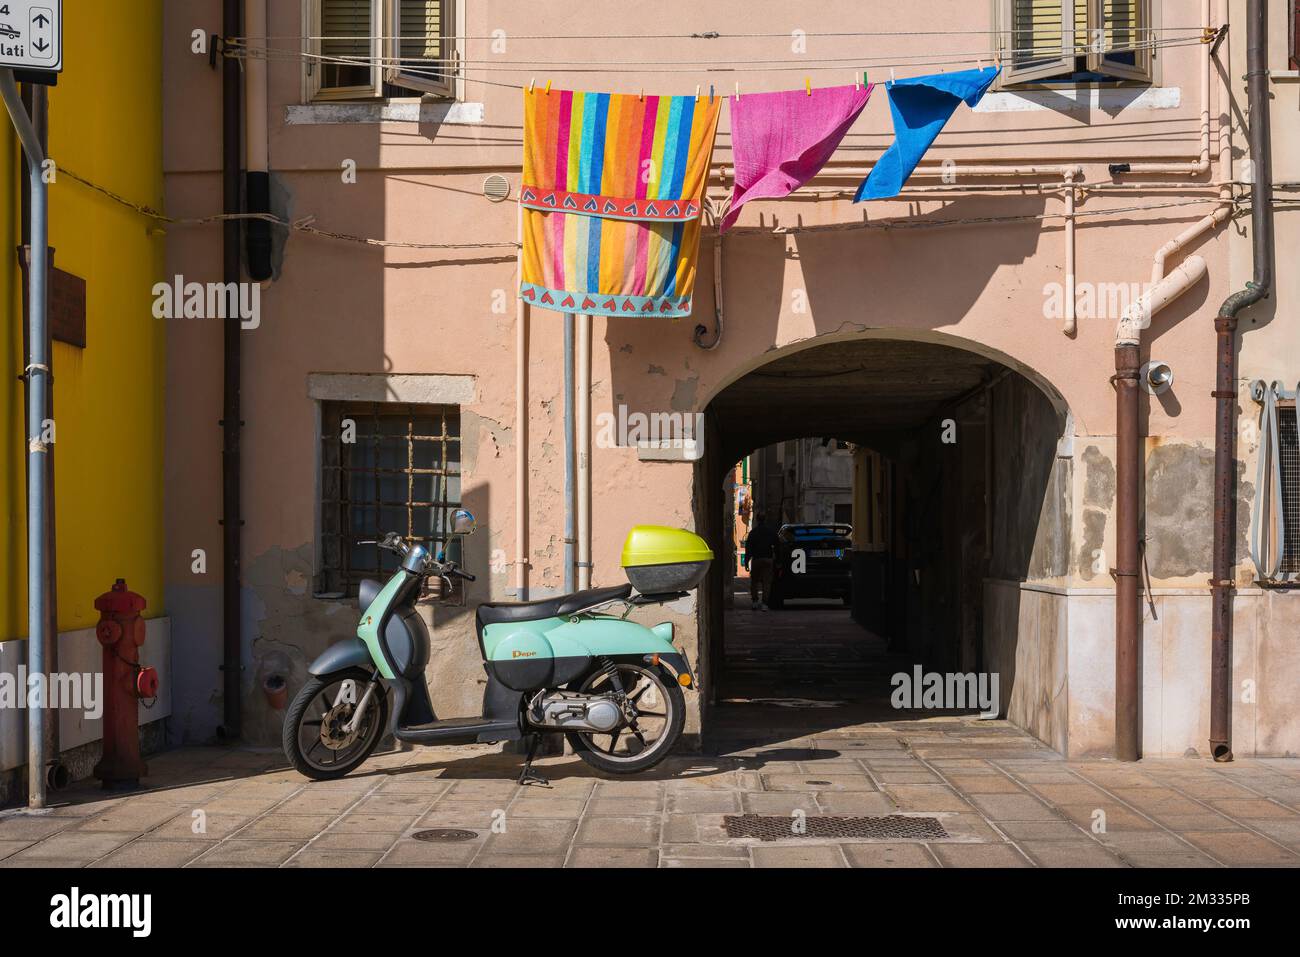 Street Italy, view in summer of a scooter parked against a pink wall with colorful laundry hanging above, Chioggia, Comune of Venice, Veneto, Italy Stock Photo